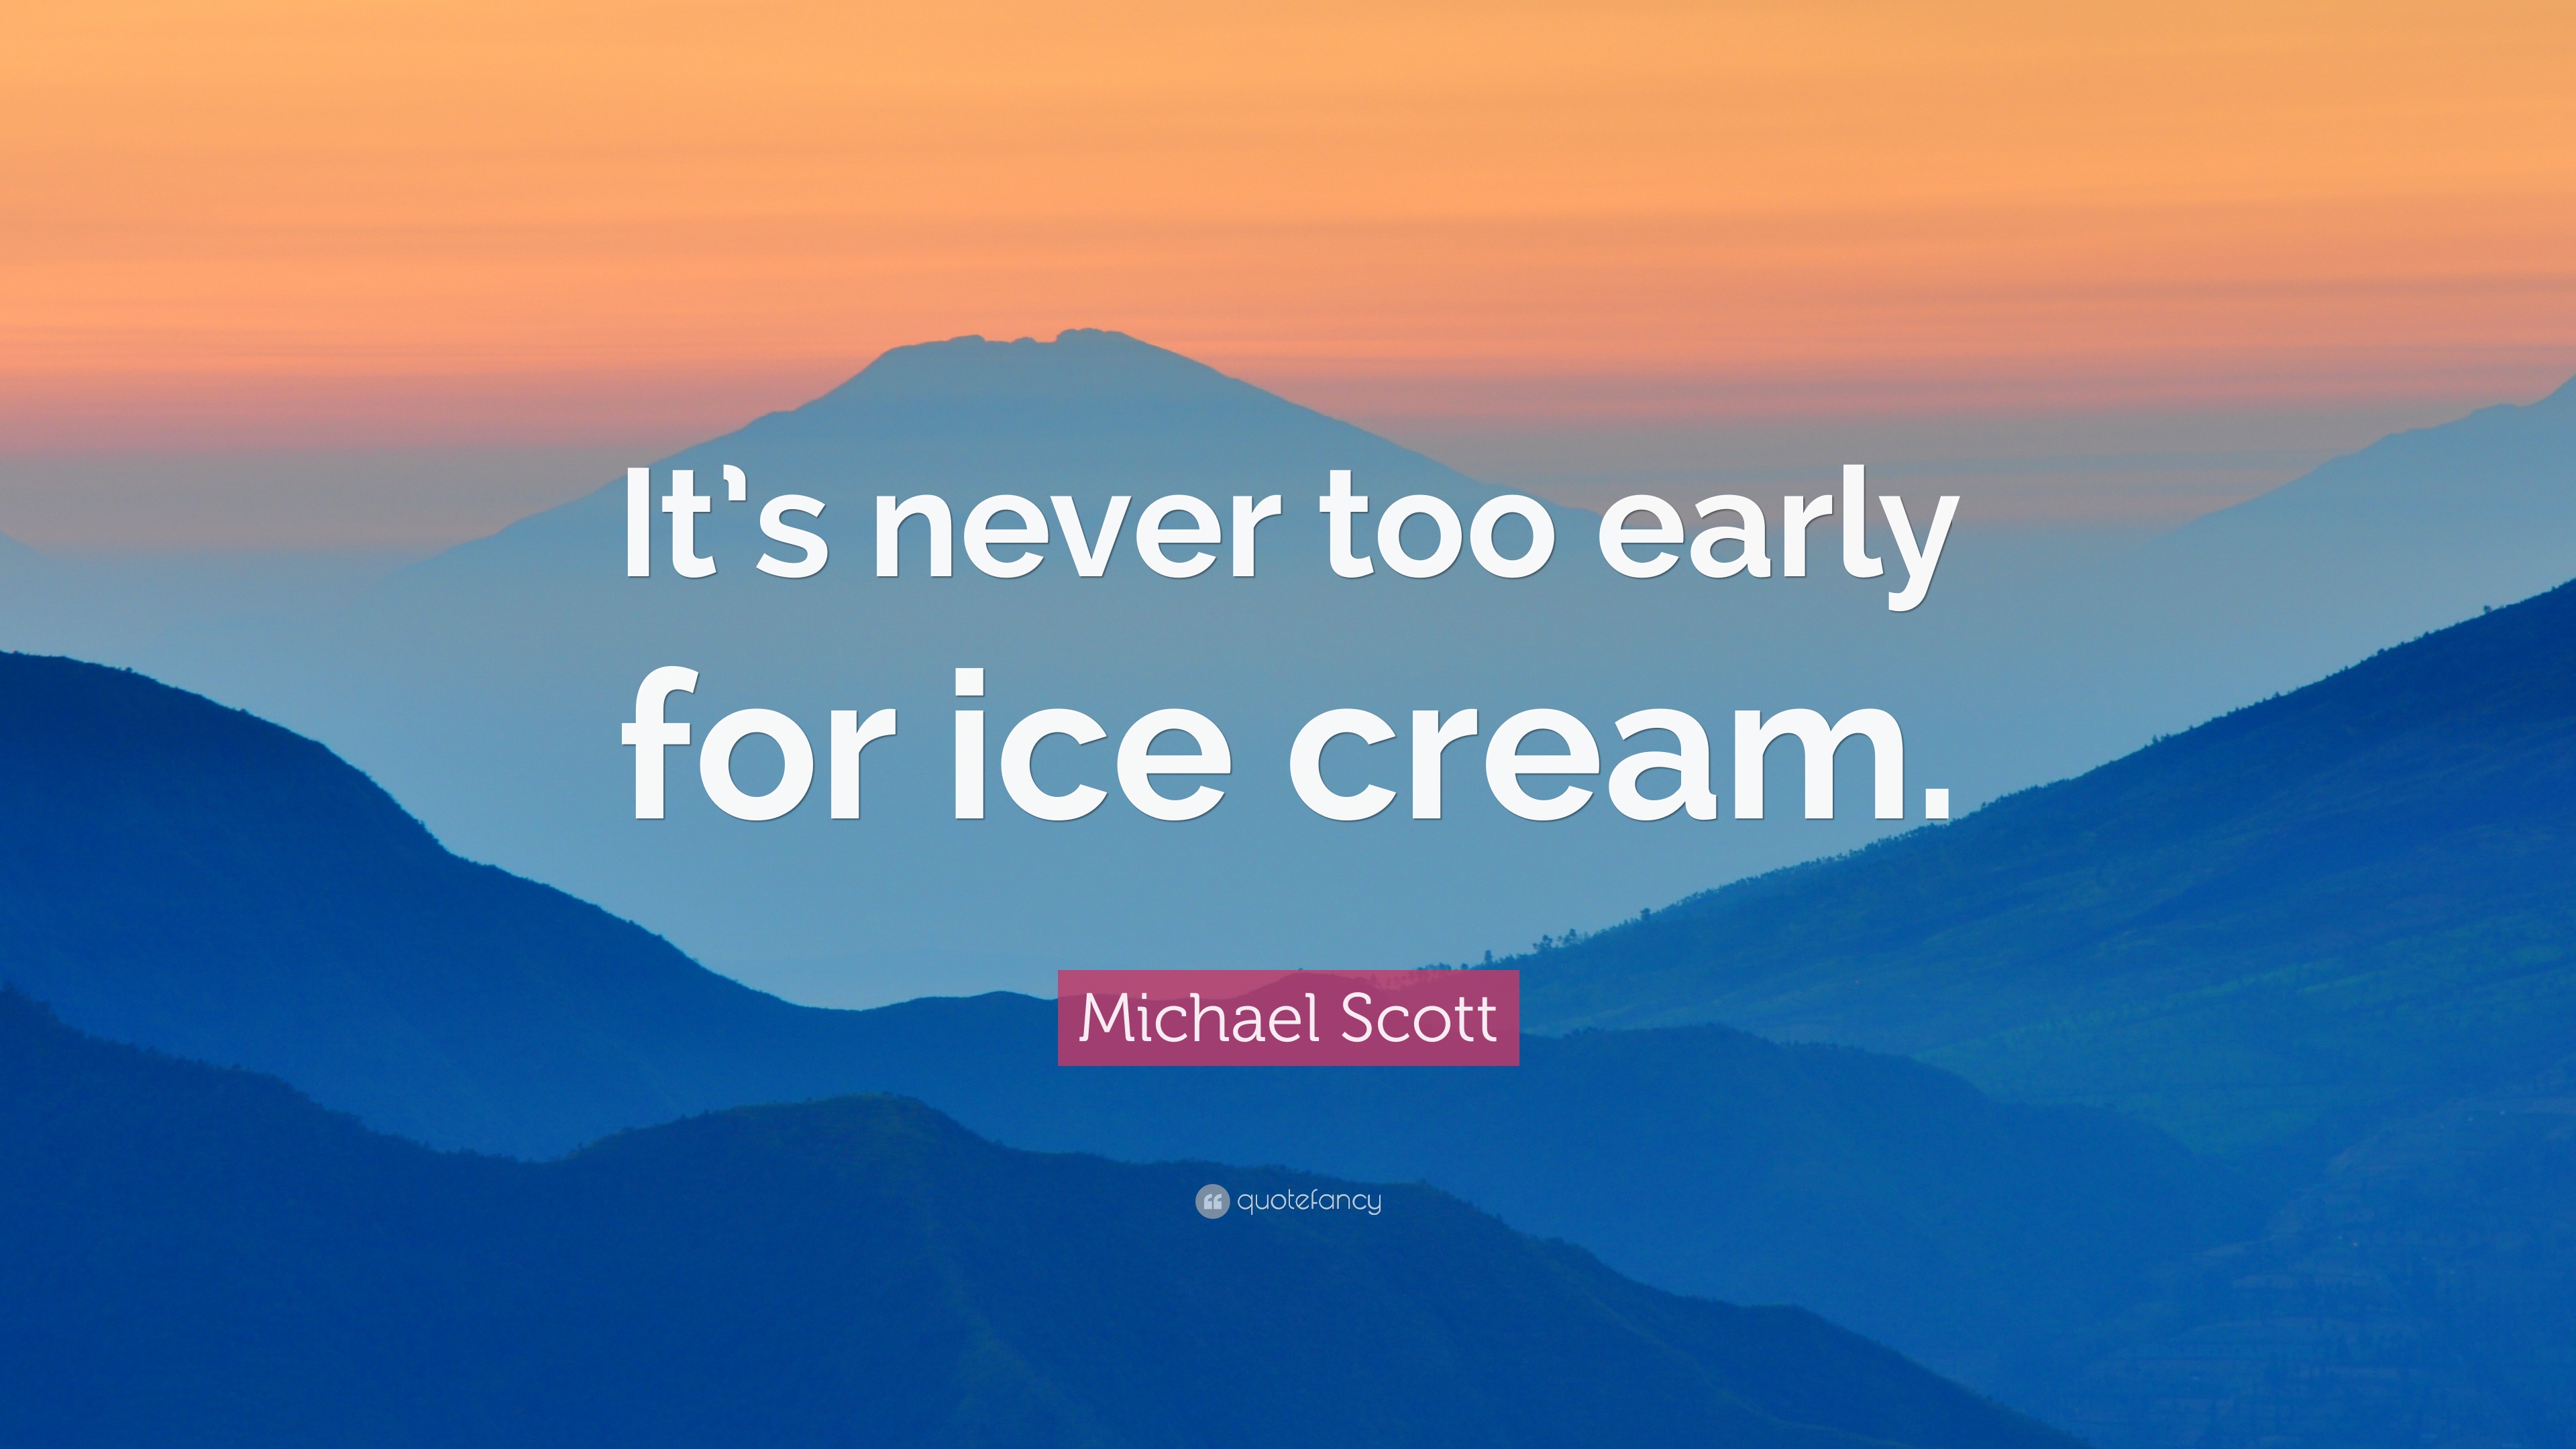 Michael Scott Quote: “It's never too early for ice cream.” 12